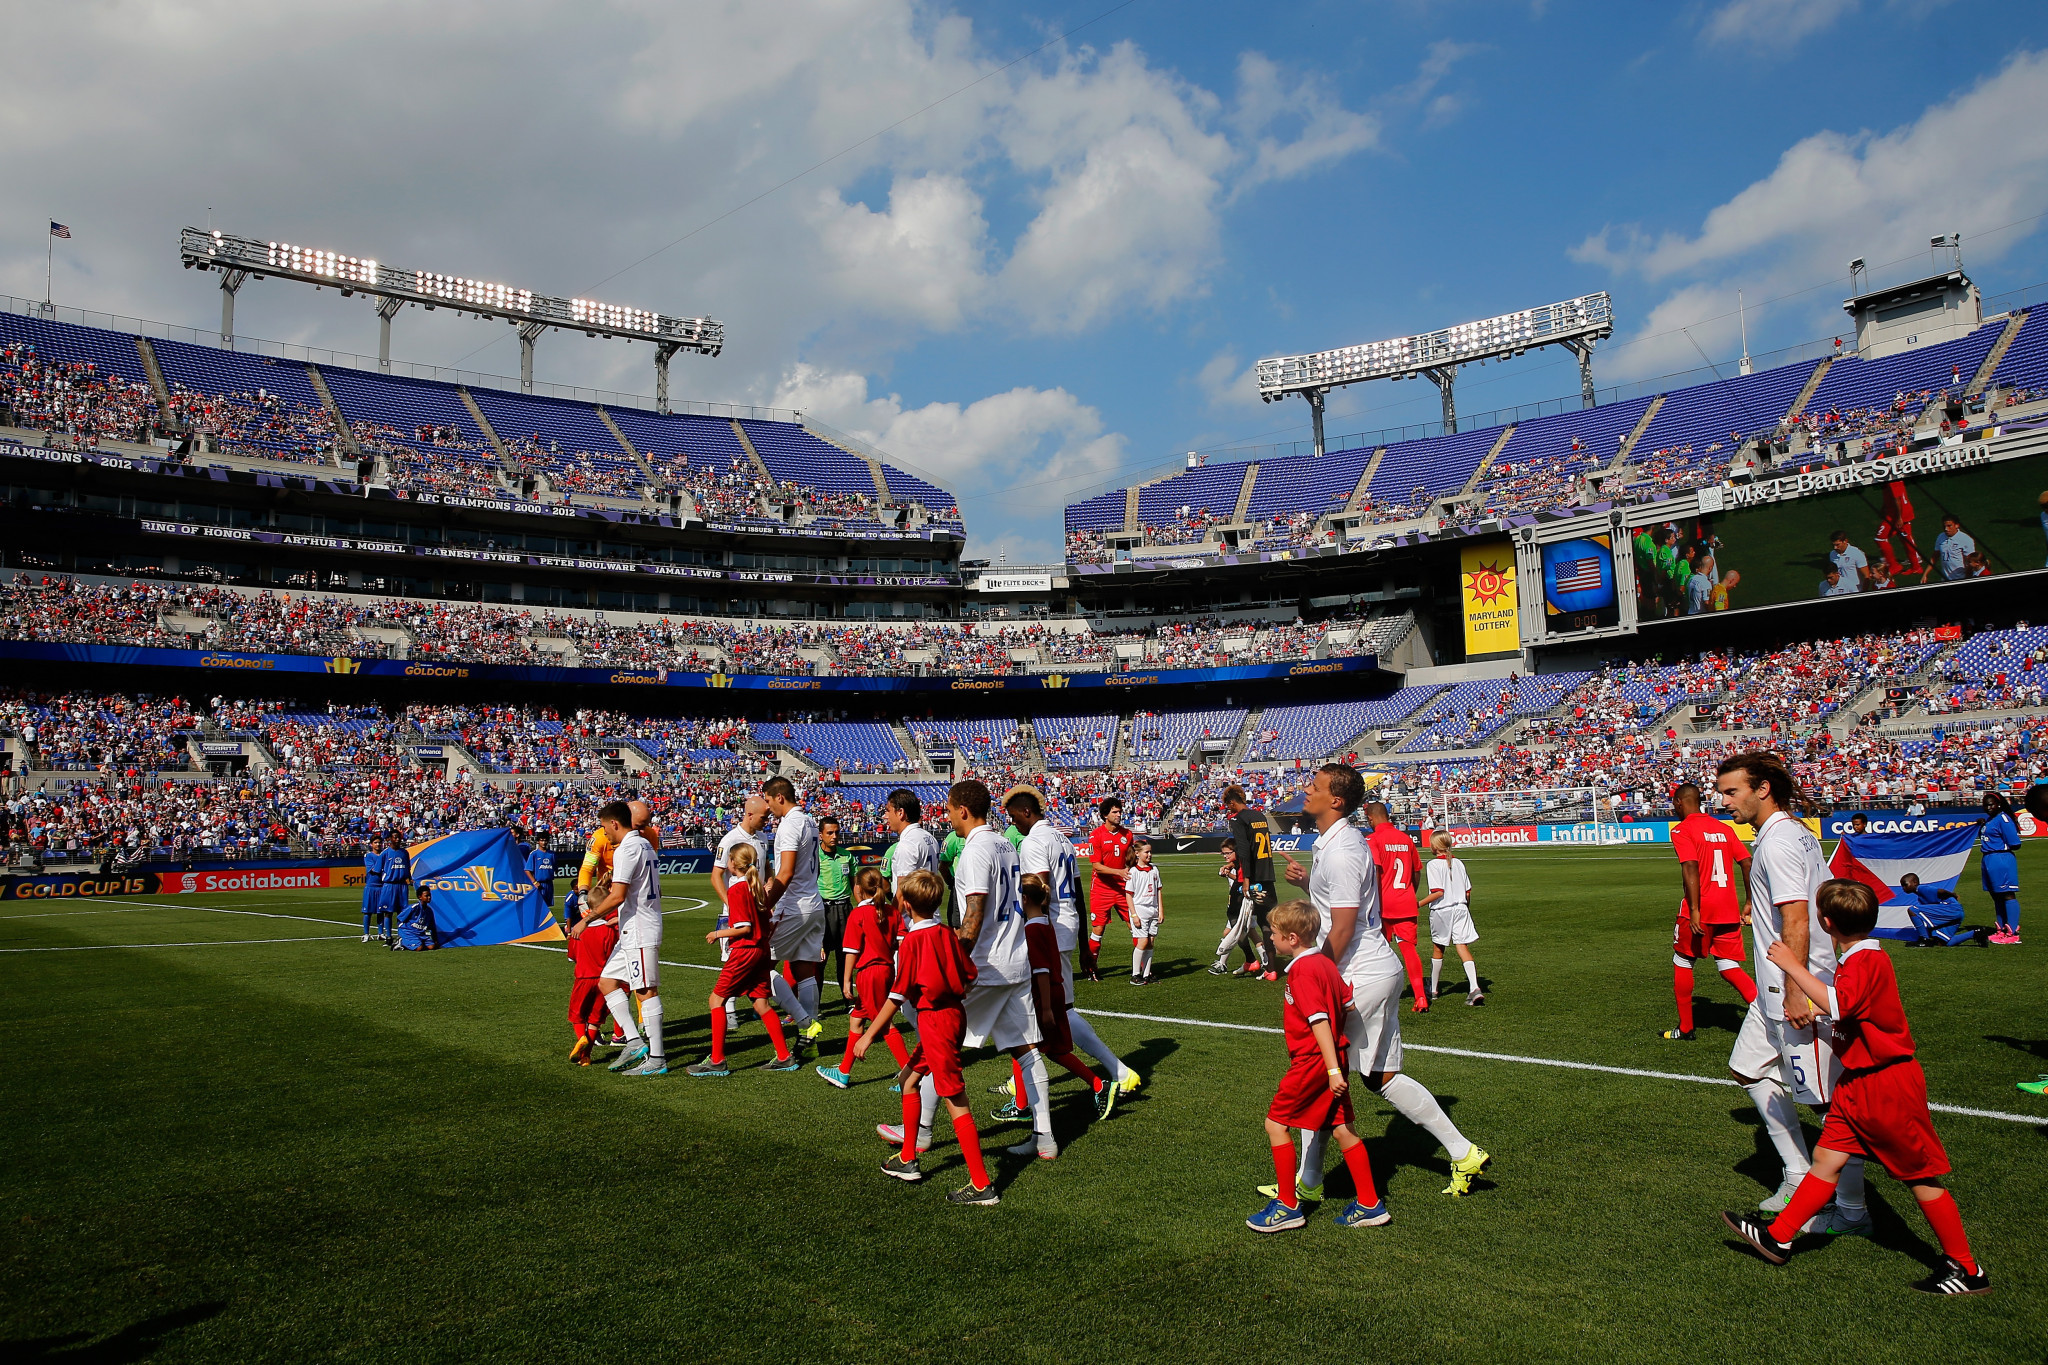 M&T Bank Stadium staged the 2015 CONCACAF Gold Cup quarter-final between the United States and Cuba ©Getty Images